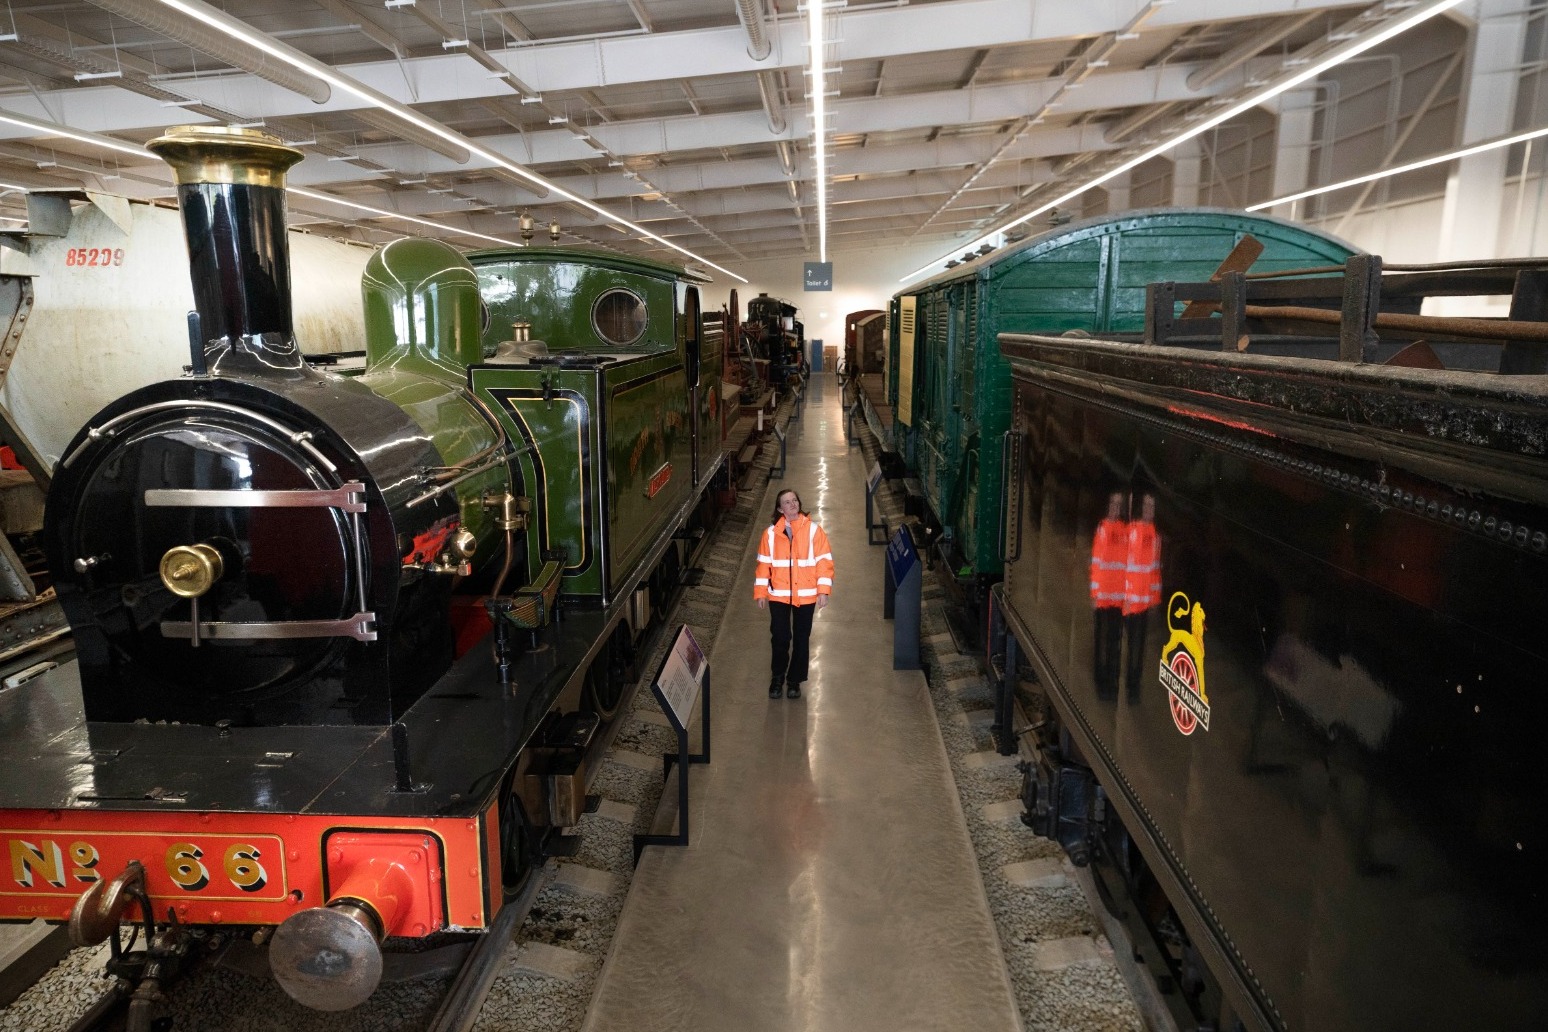 Rail vehicles assembled for Europes biggest display